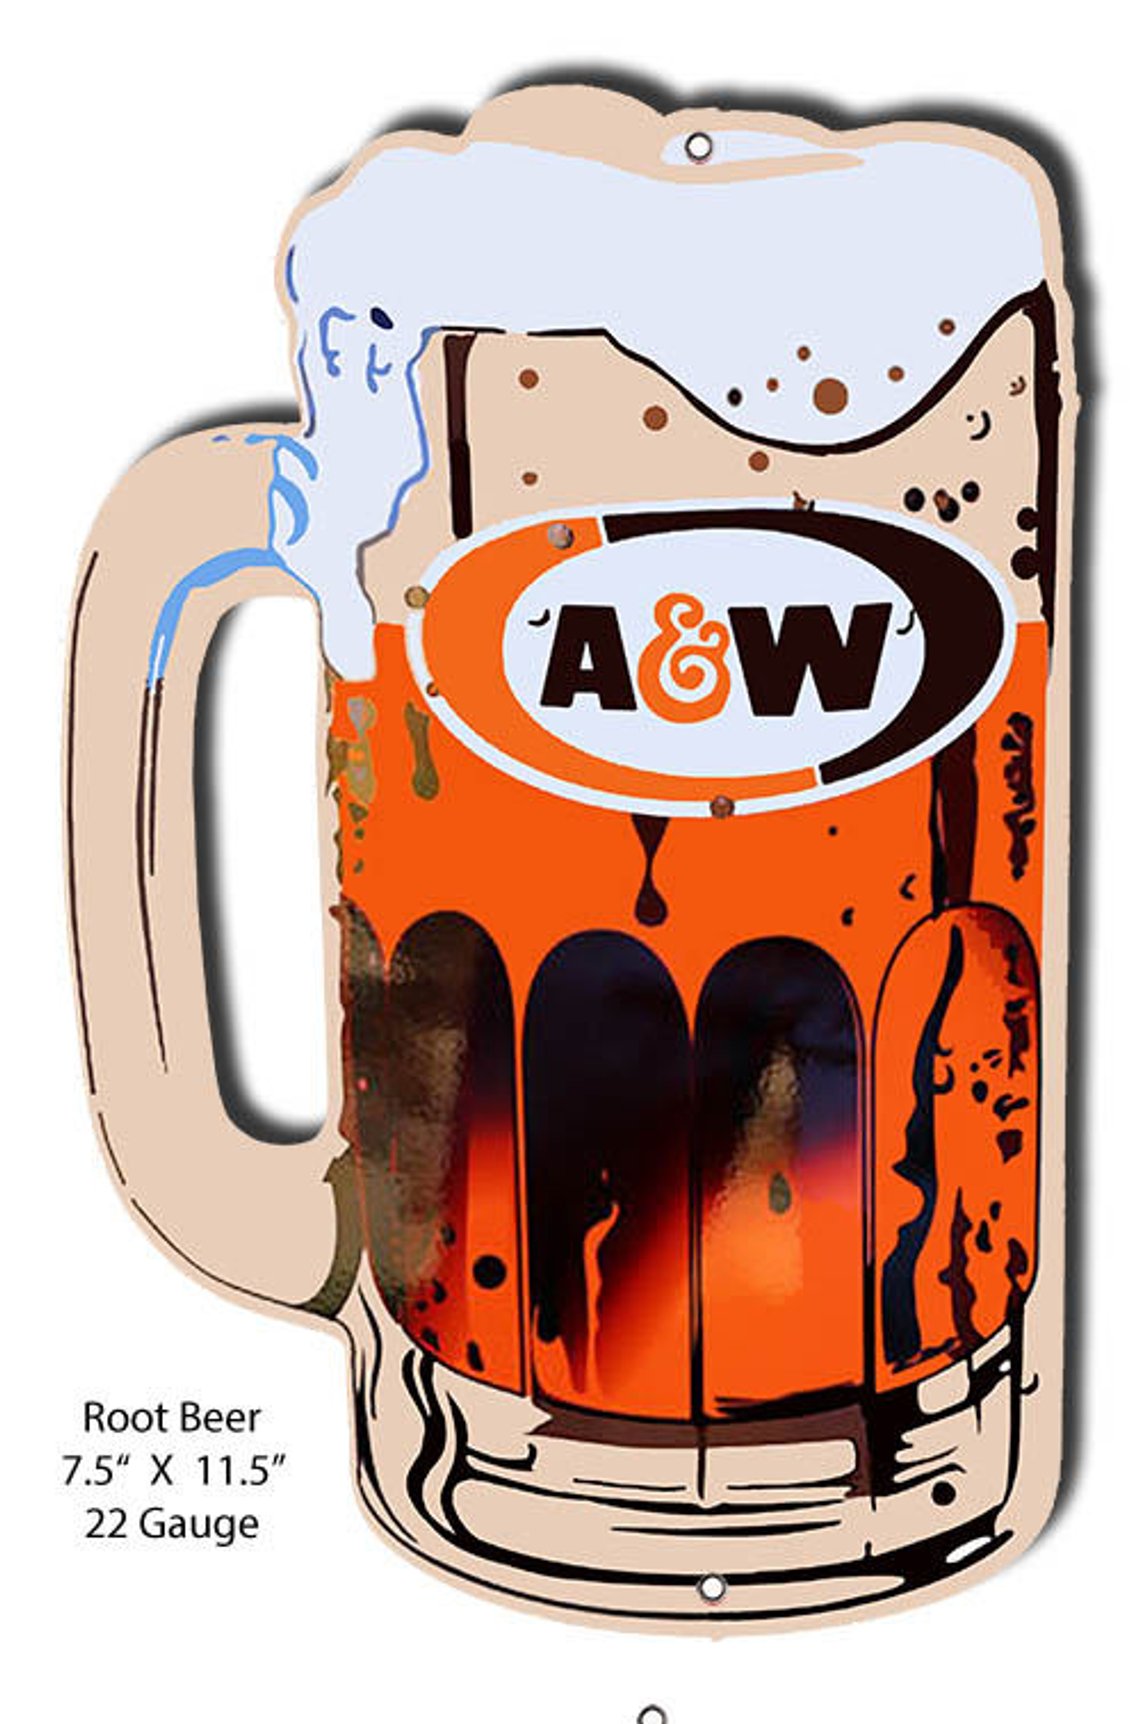 Laser Cut Out Sign of A&W Root Beer Mug